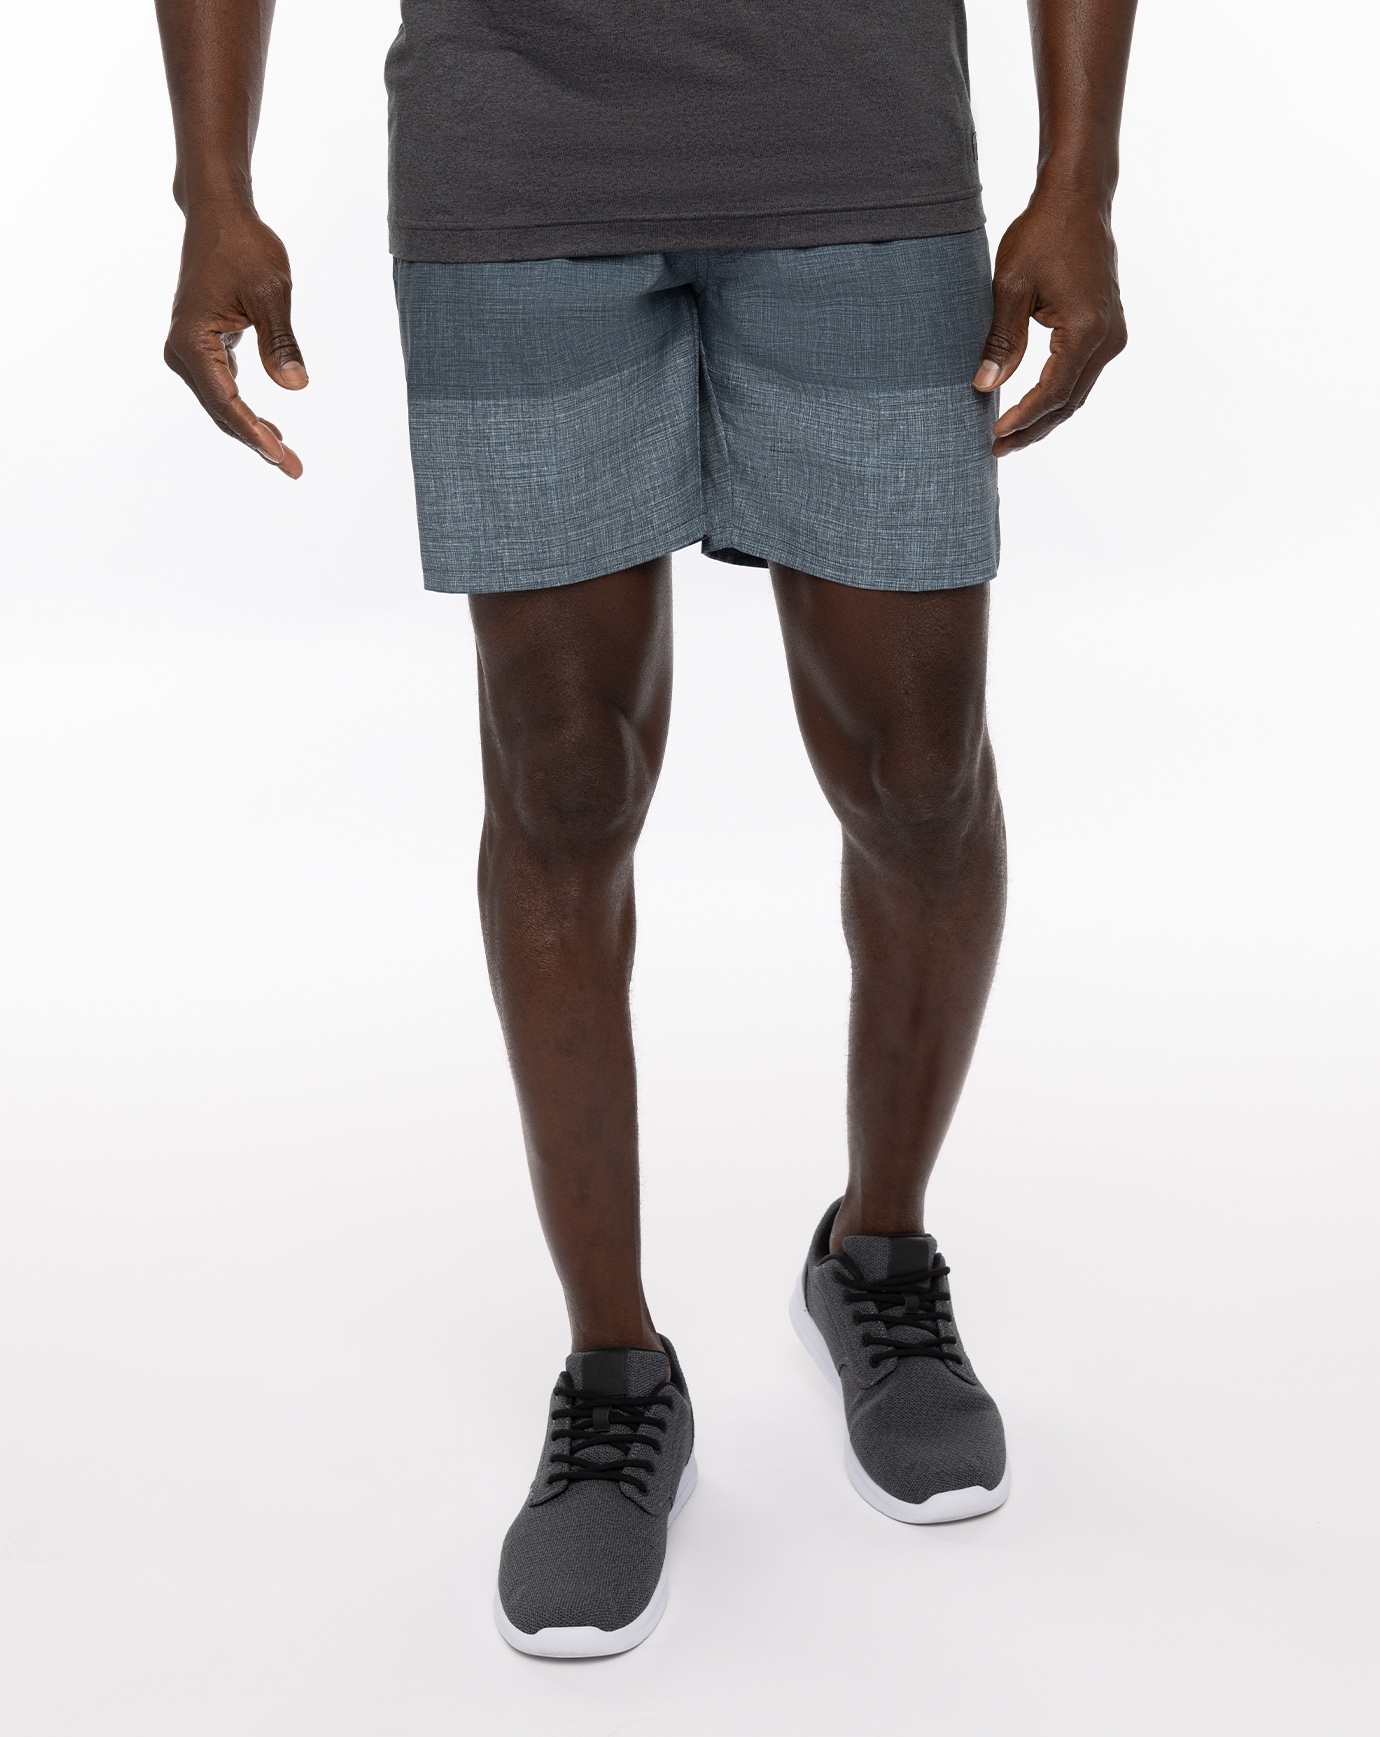 Related Product - COASTVIEW ACTIVE SHORT